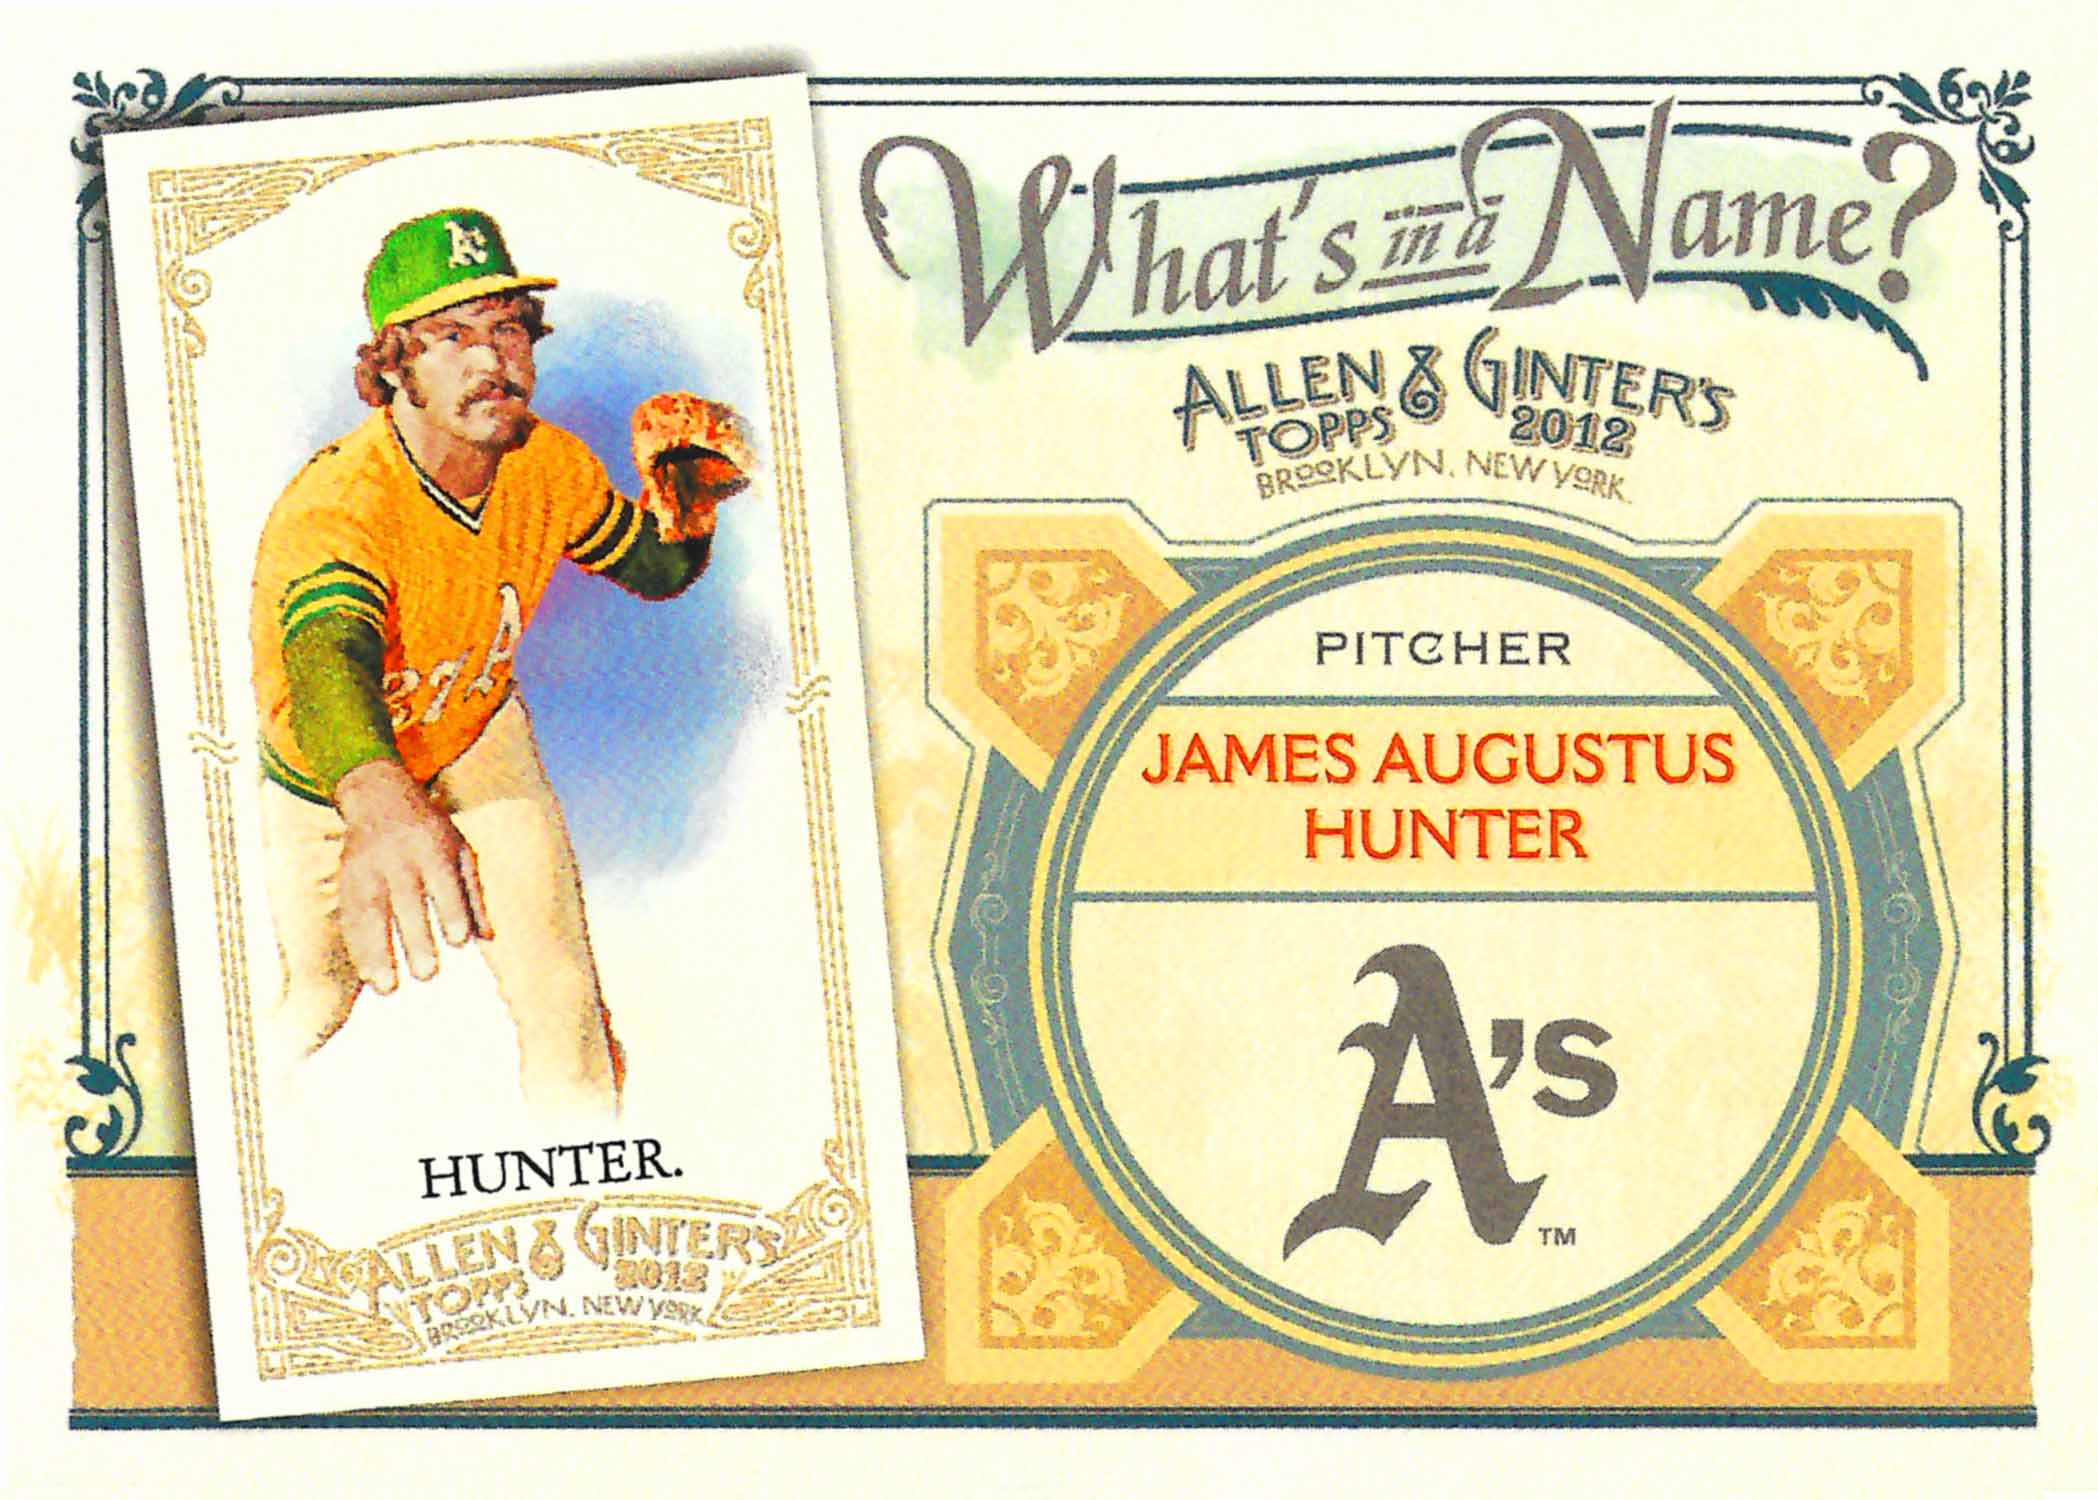 2012 Topps Allen and Ginter What's in a Name